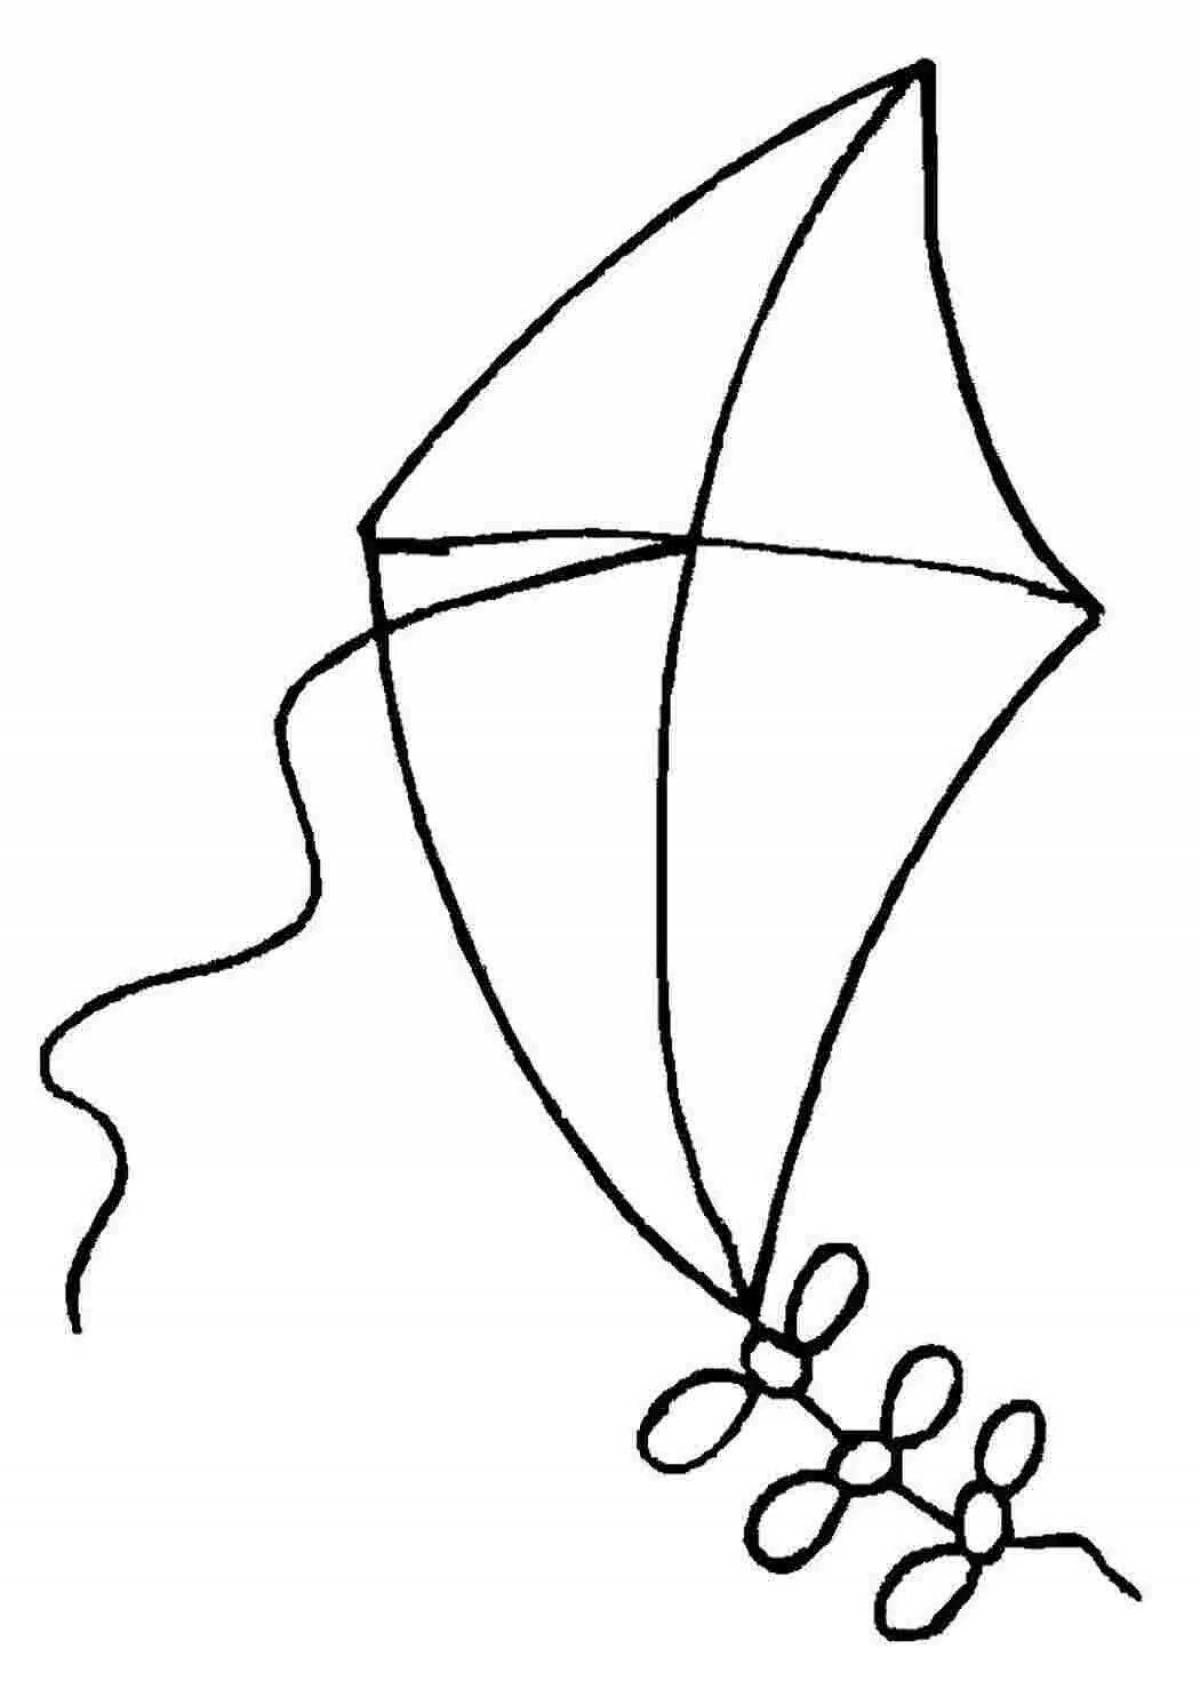 Colored kite coloring page for kids